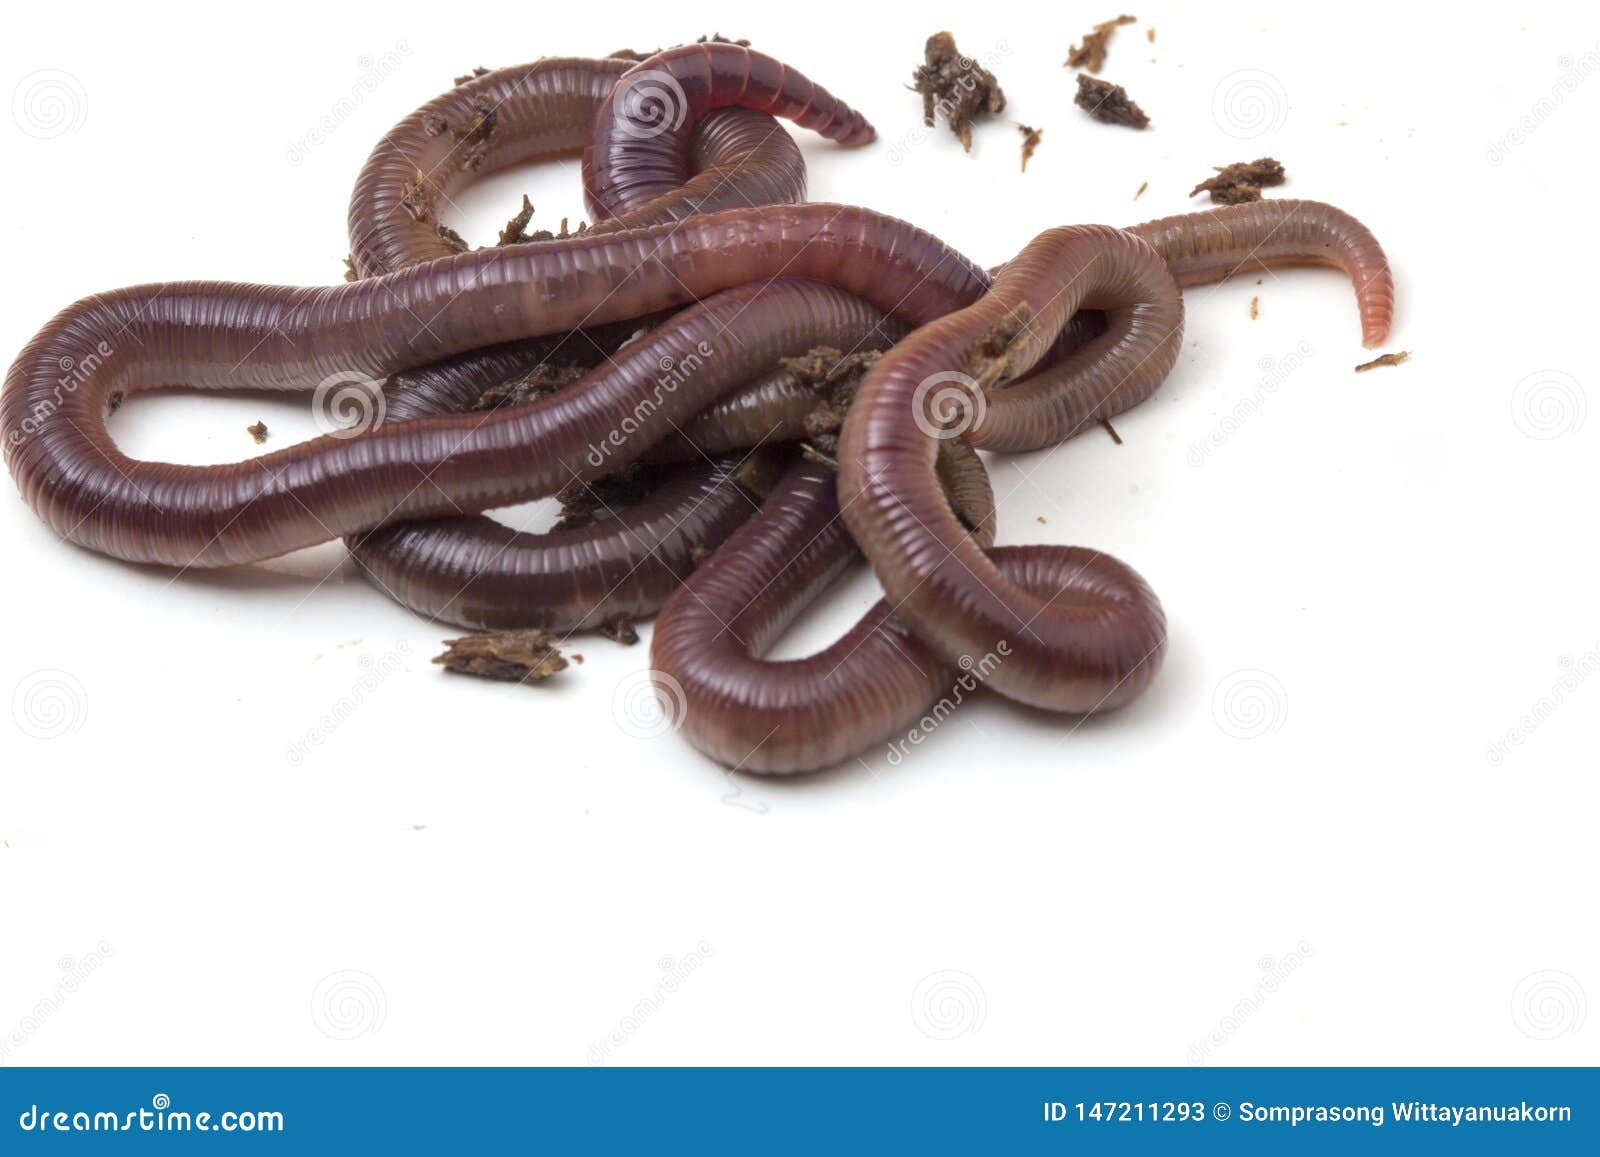 African Night Crawler, Earthworms Isolated on White Background